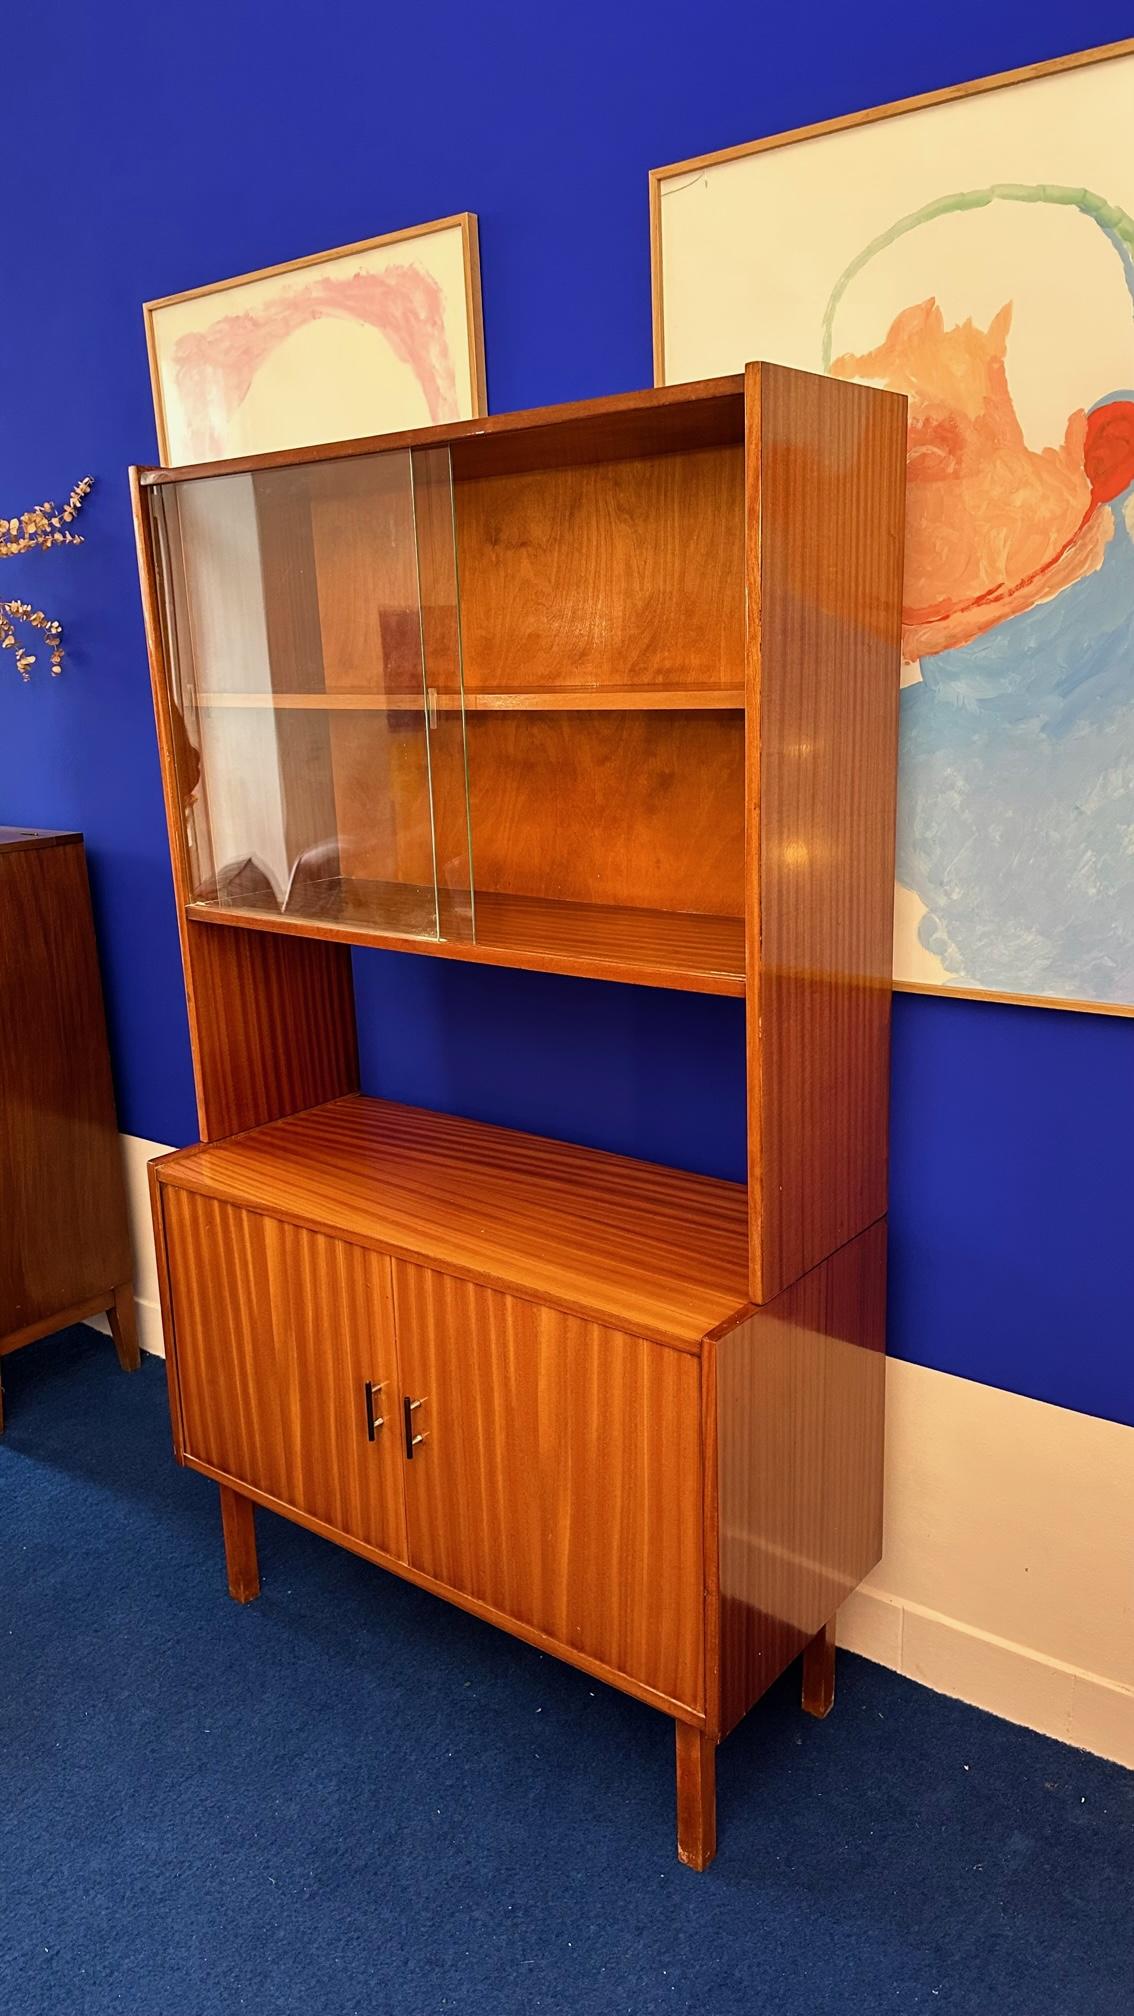 Small enfilade topped by a glass cabinet with two sliding glass doors. Nice design offering a good storage. Polish furniture from the 60's. Dimensions: 100 cm long, 42 cm deep, 32 cm for the showcase, 173 cm high.